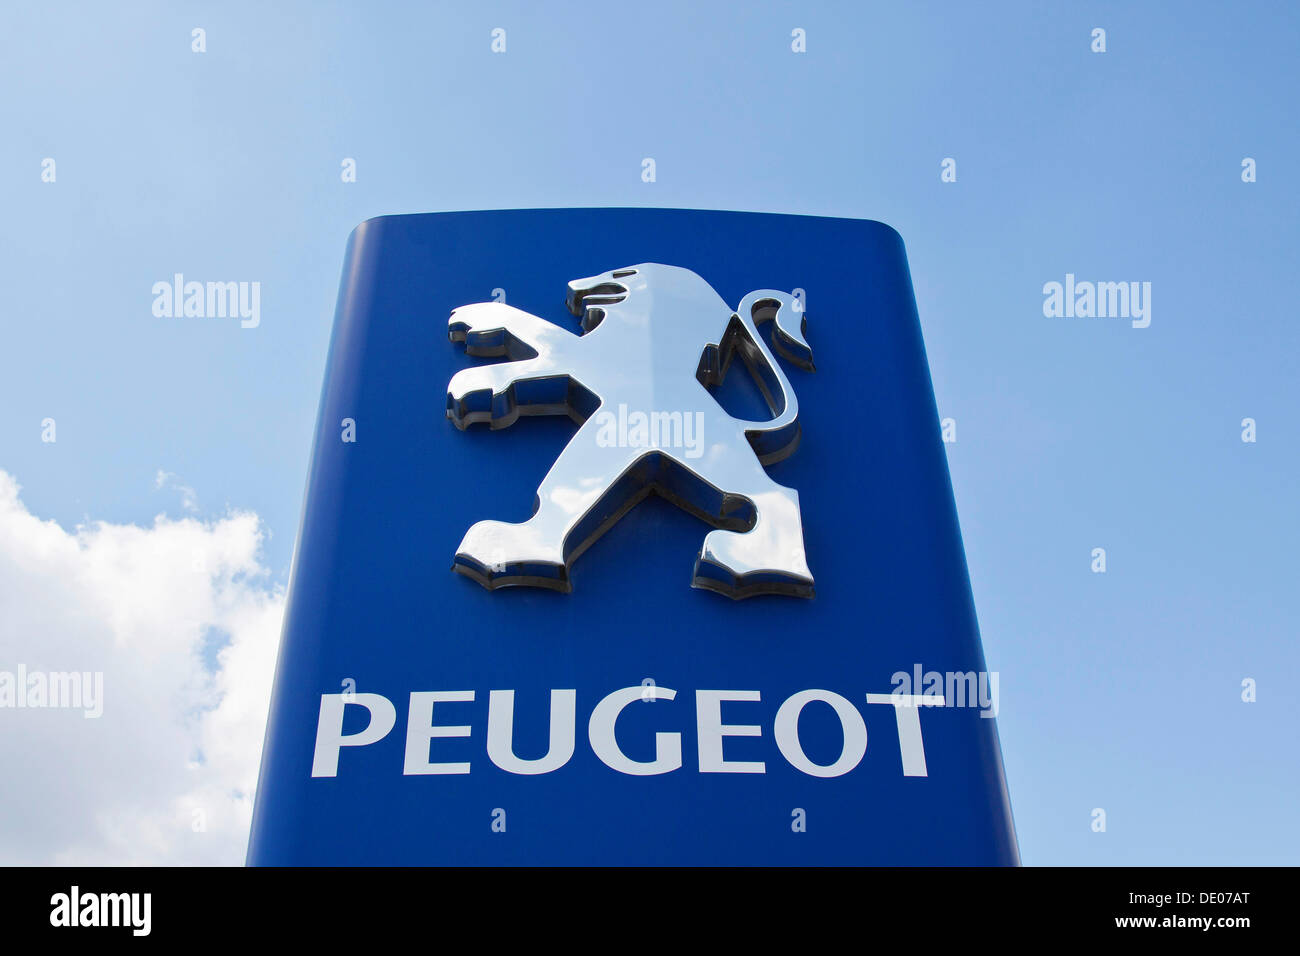 Peugeot, a French car manufacturer, logo Stock Photo